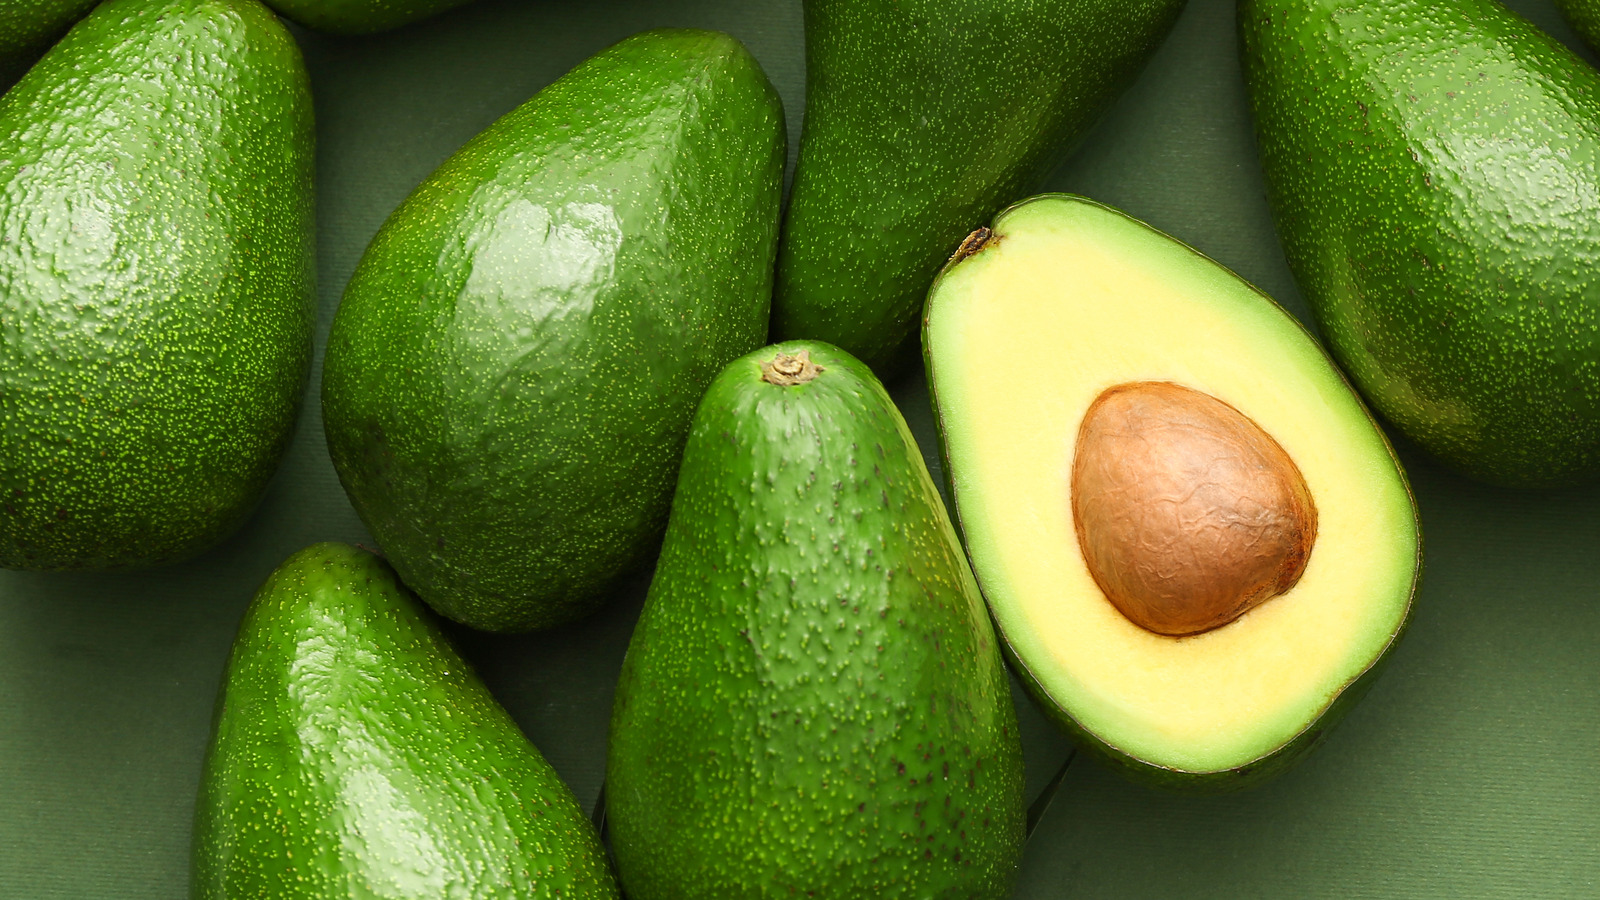 When You Eat An Avocado Every Day, This Is What Happens To You